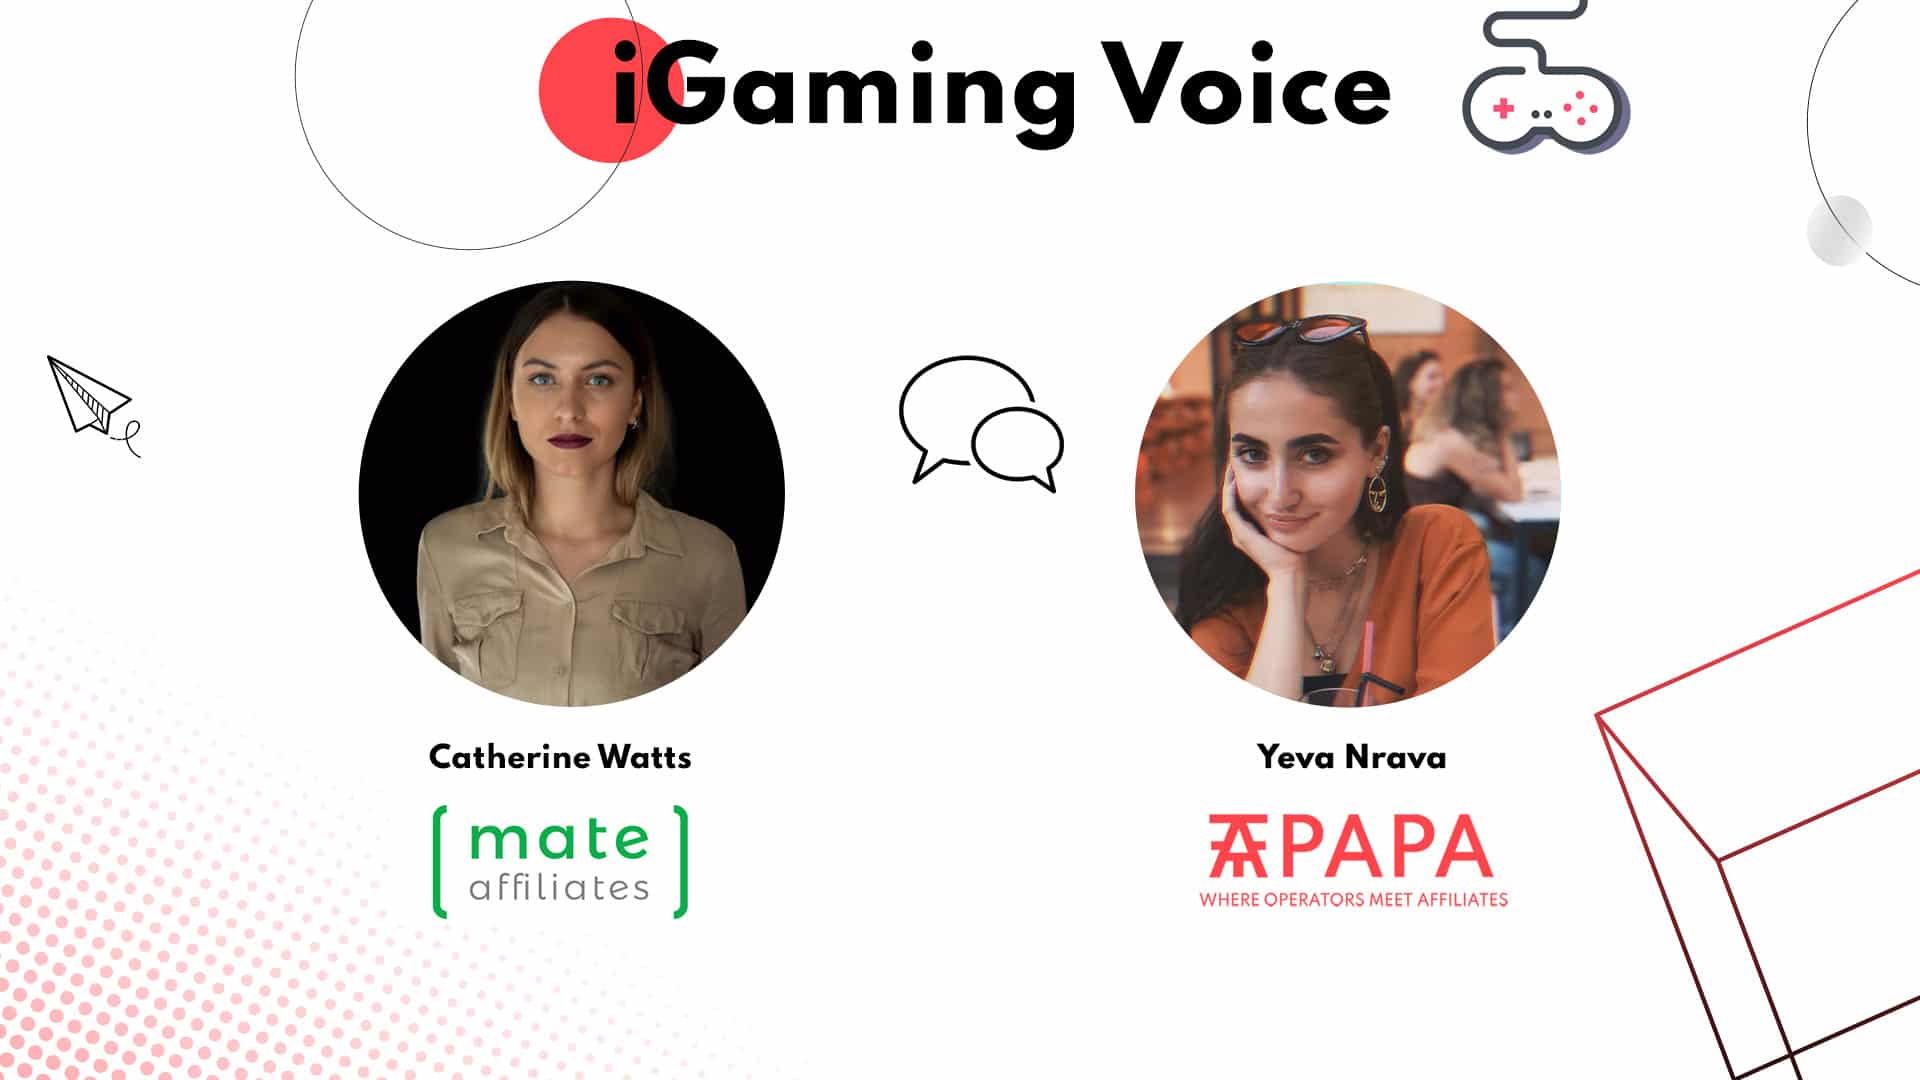 iGaming Voice by Yeva – Mate Affiliates